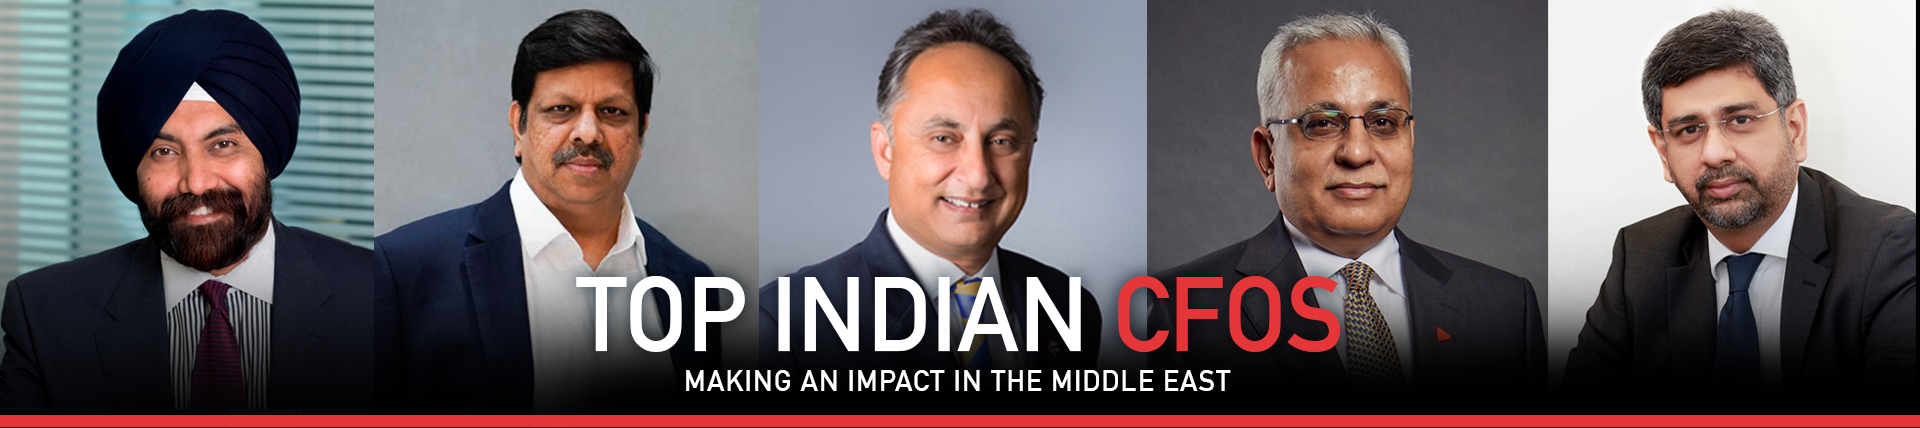 Top Indian CFOs Making An Impact In The Middle East 2019